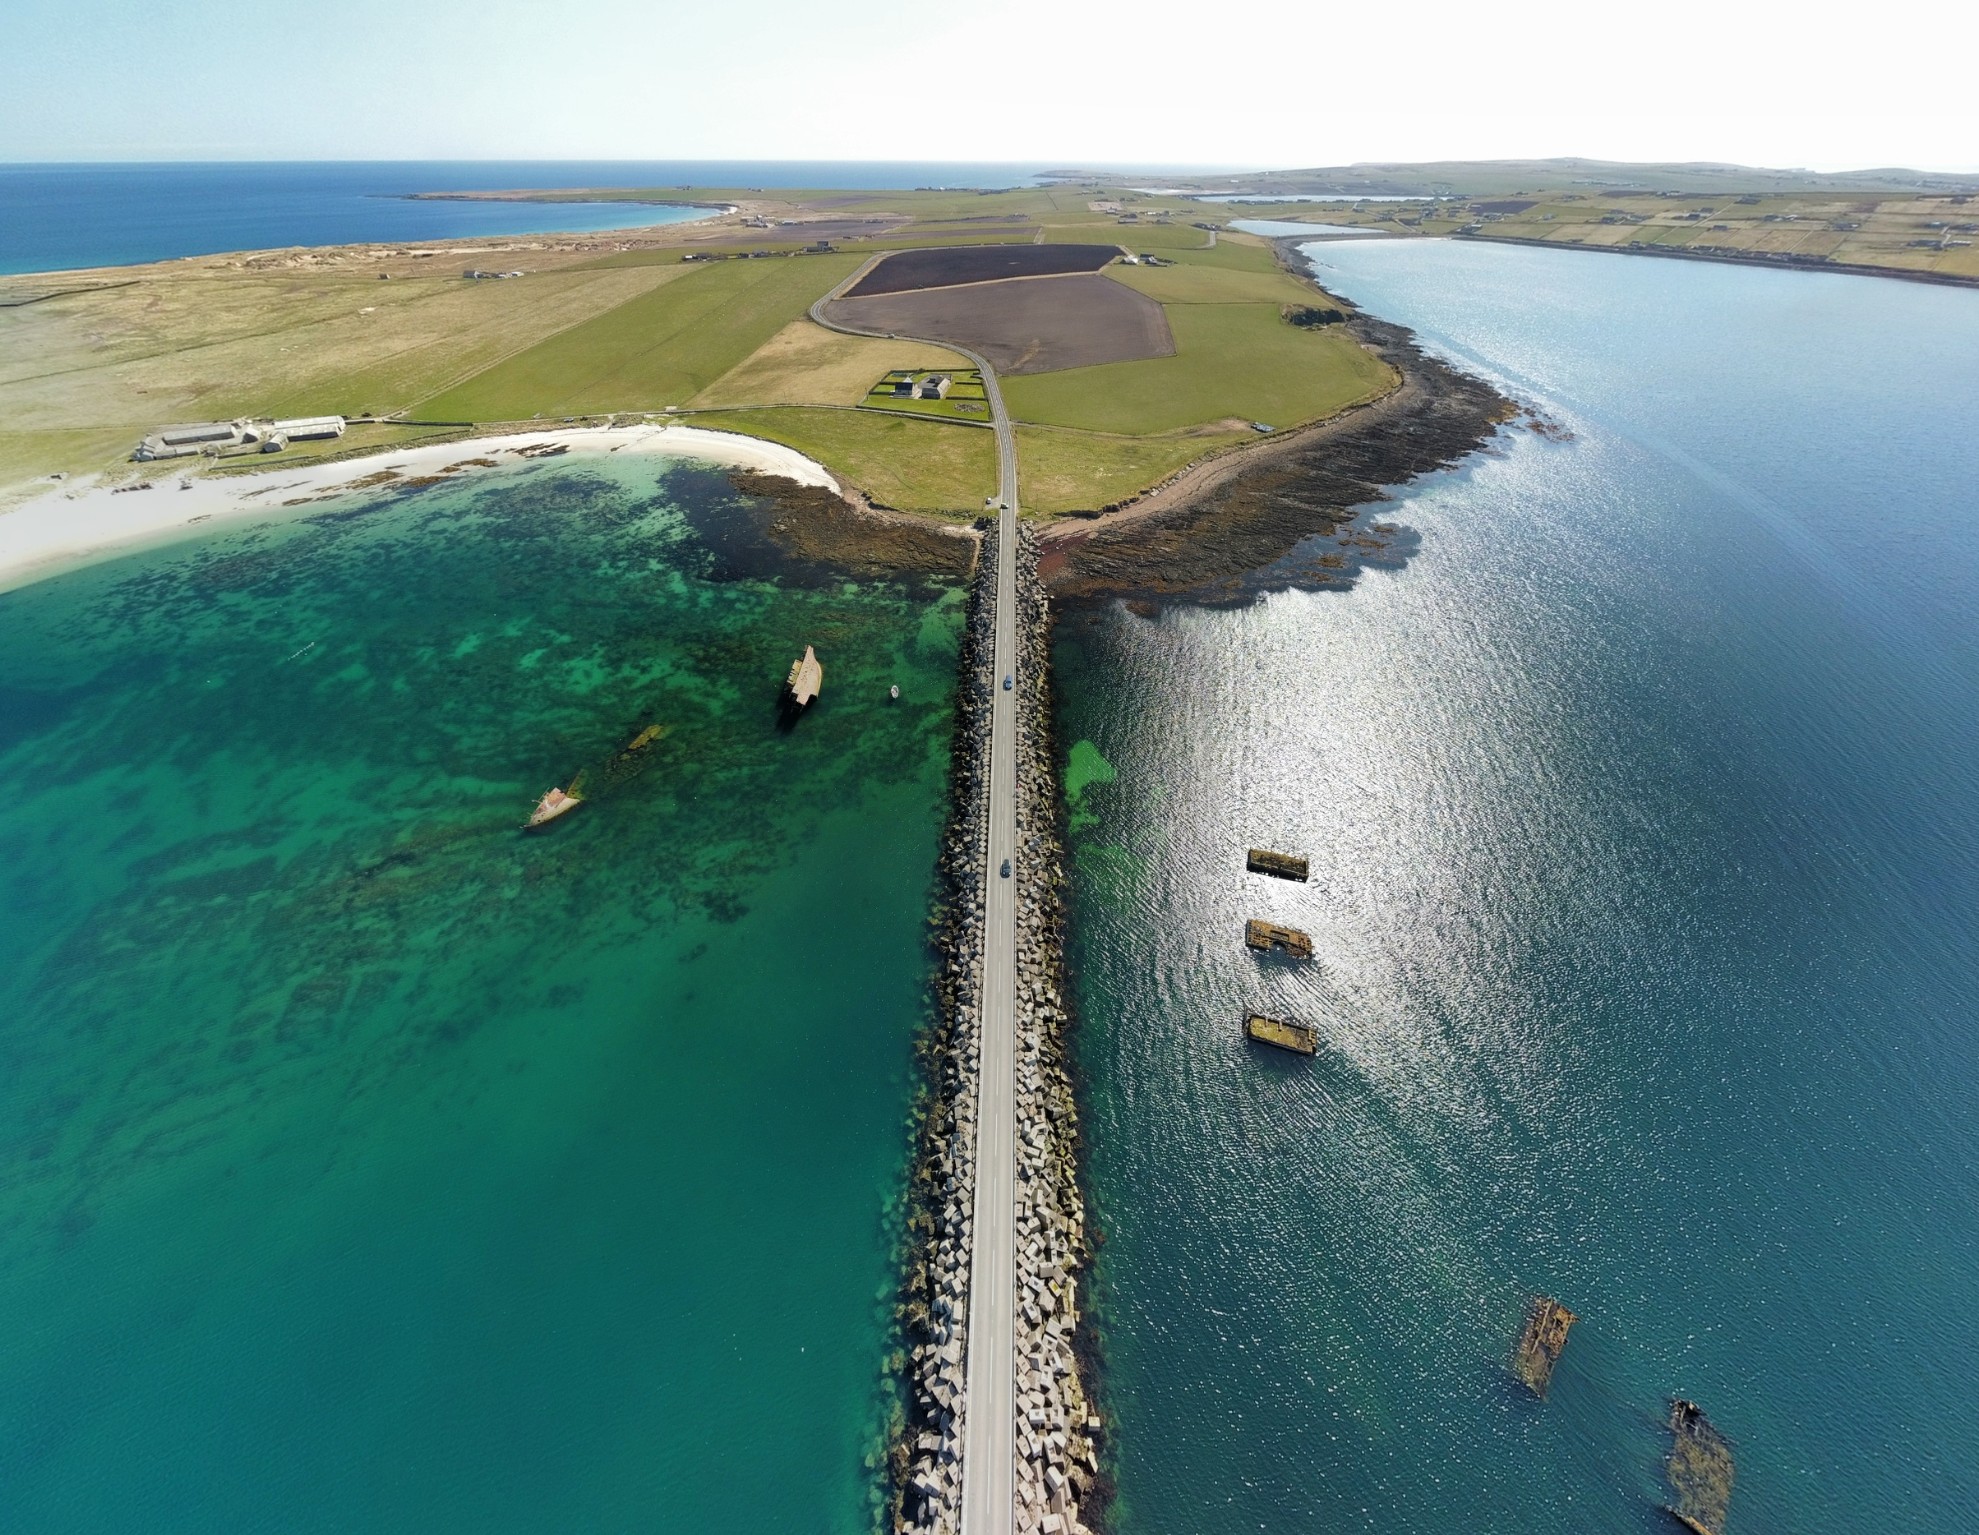 The Churchill Barriers, Orkney - image by Luke Evans